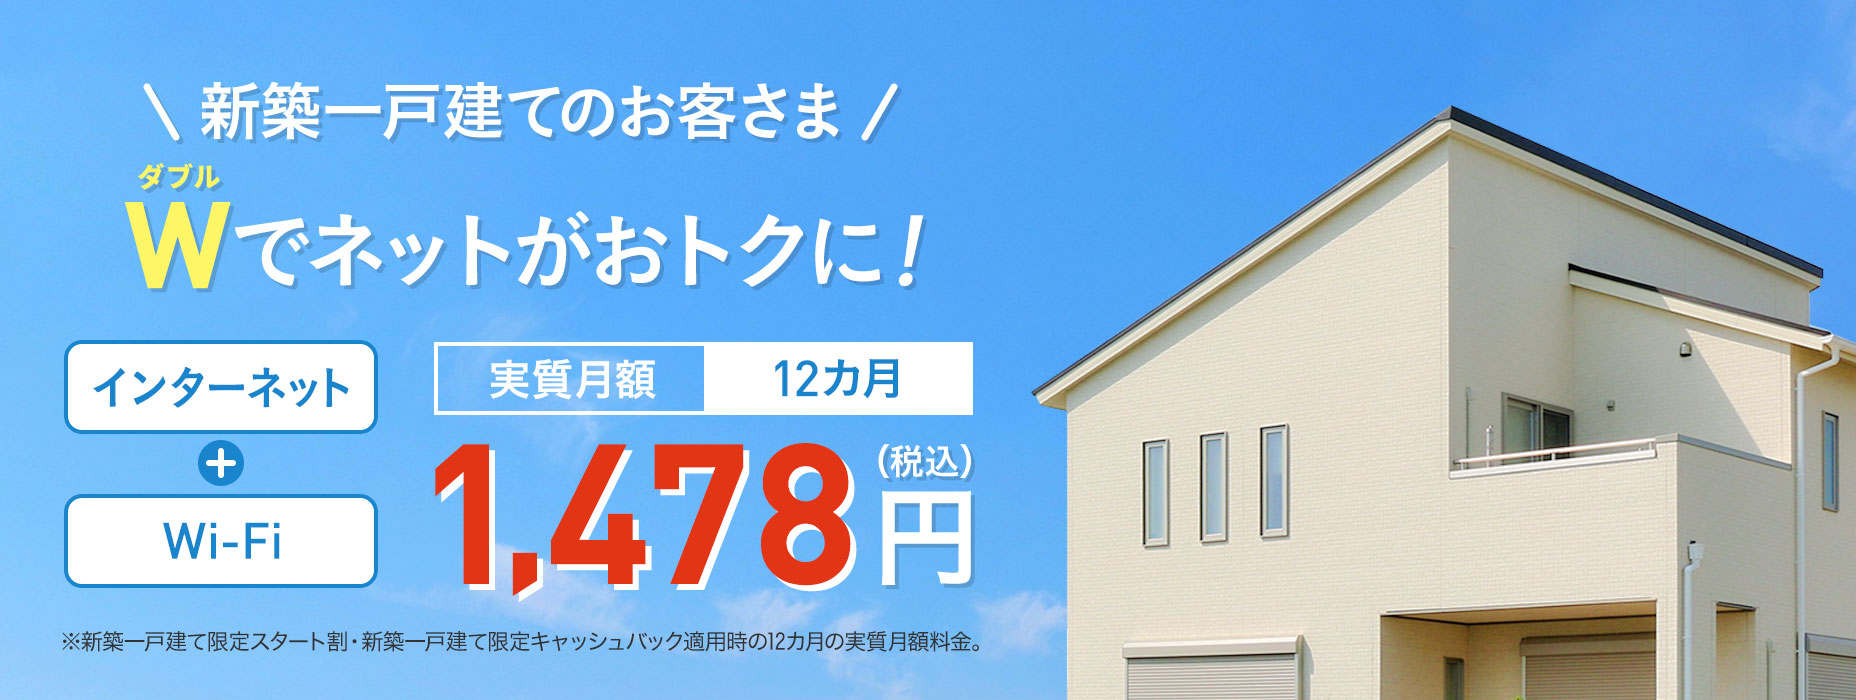 For new detached house customers W (double) offers great internet access Internet + Wi-Fi Effective monthly fee 12 months ¥1,478 (tax included)